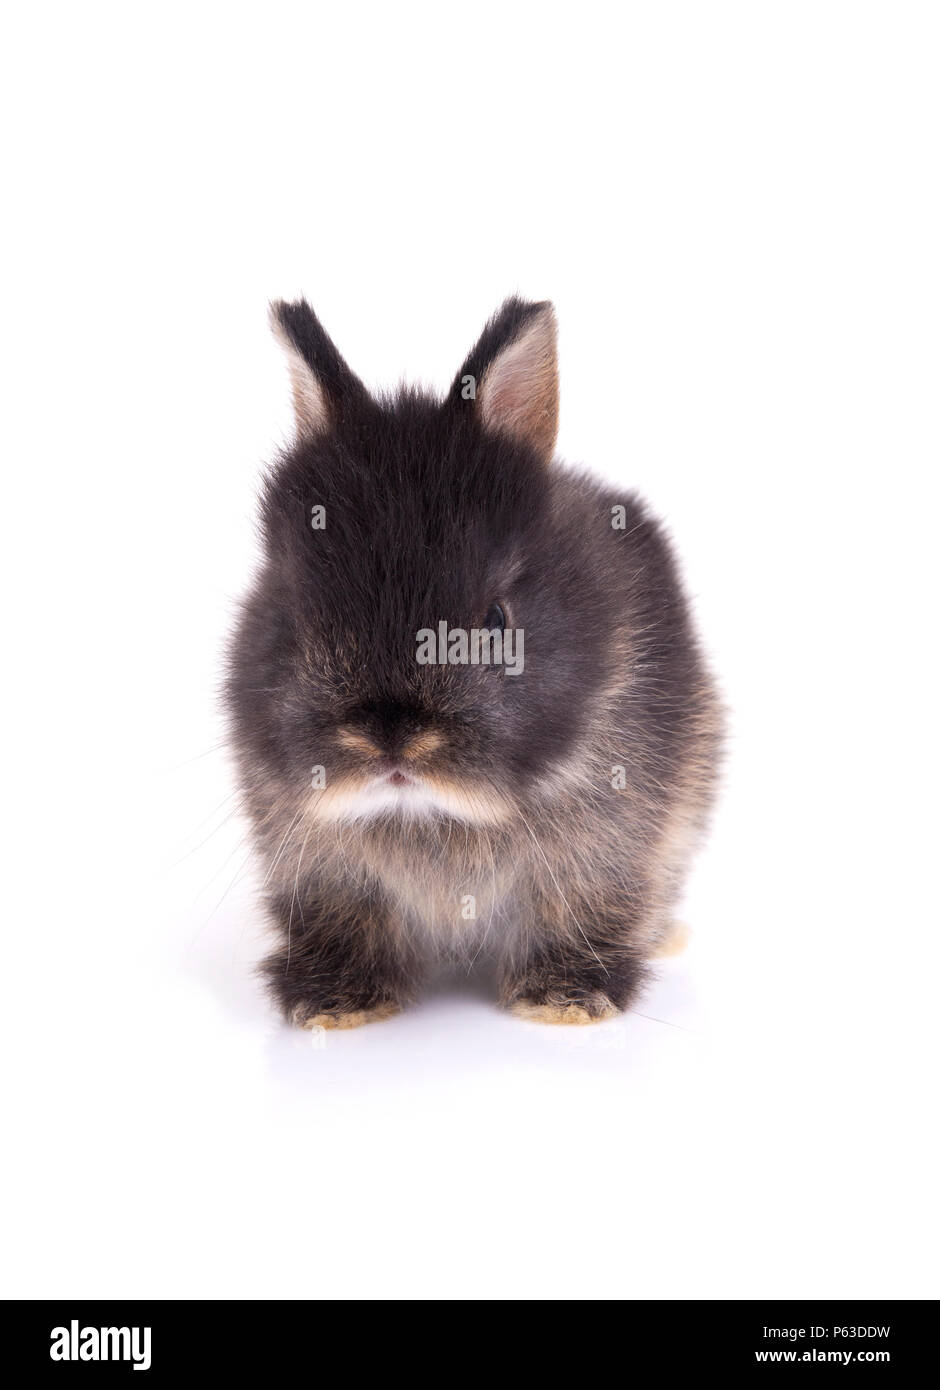 Young netherland dwarf rabbit sitting on floor in white background. Stock Photo